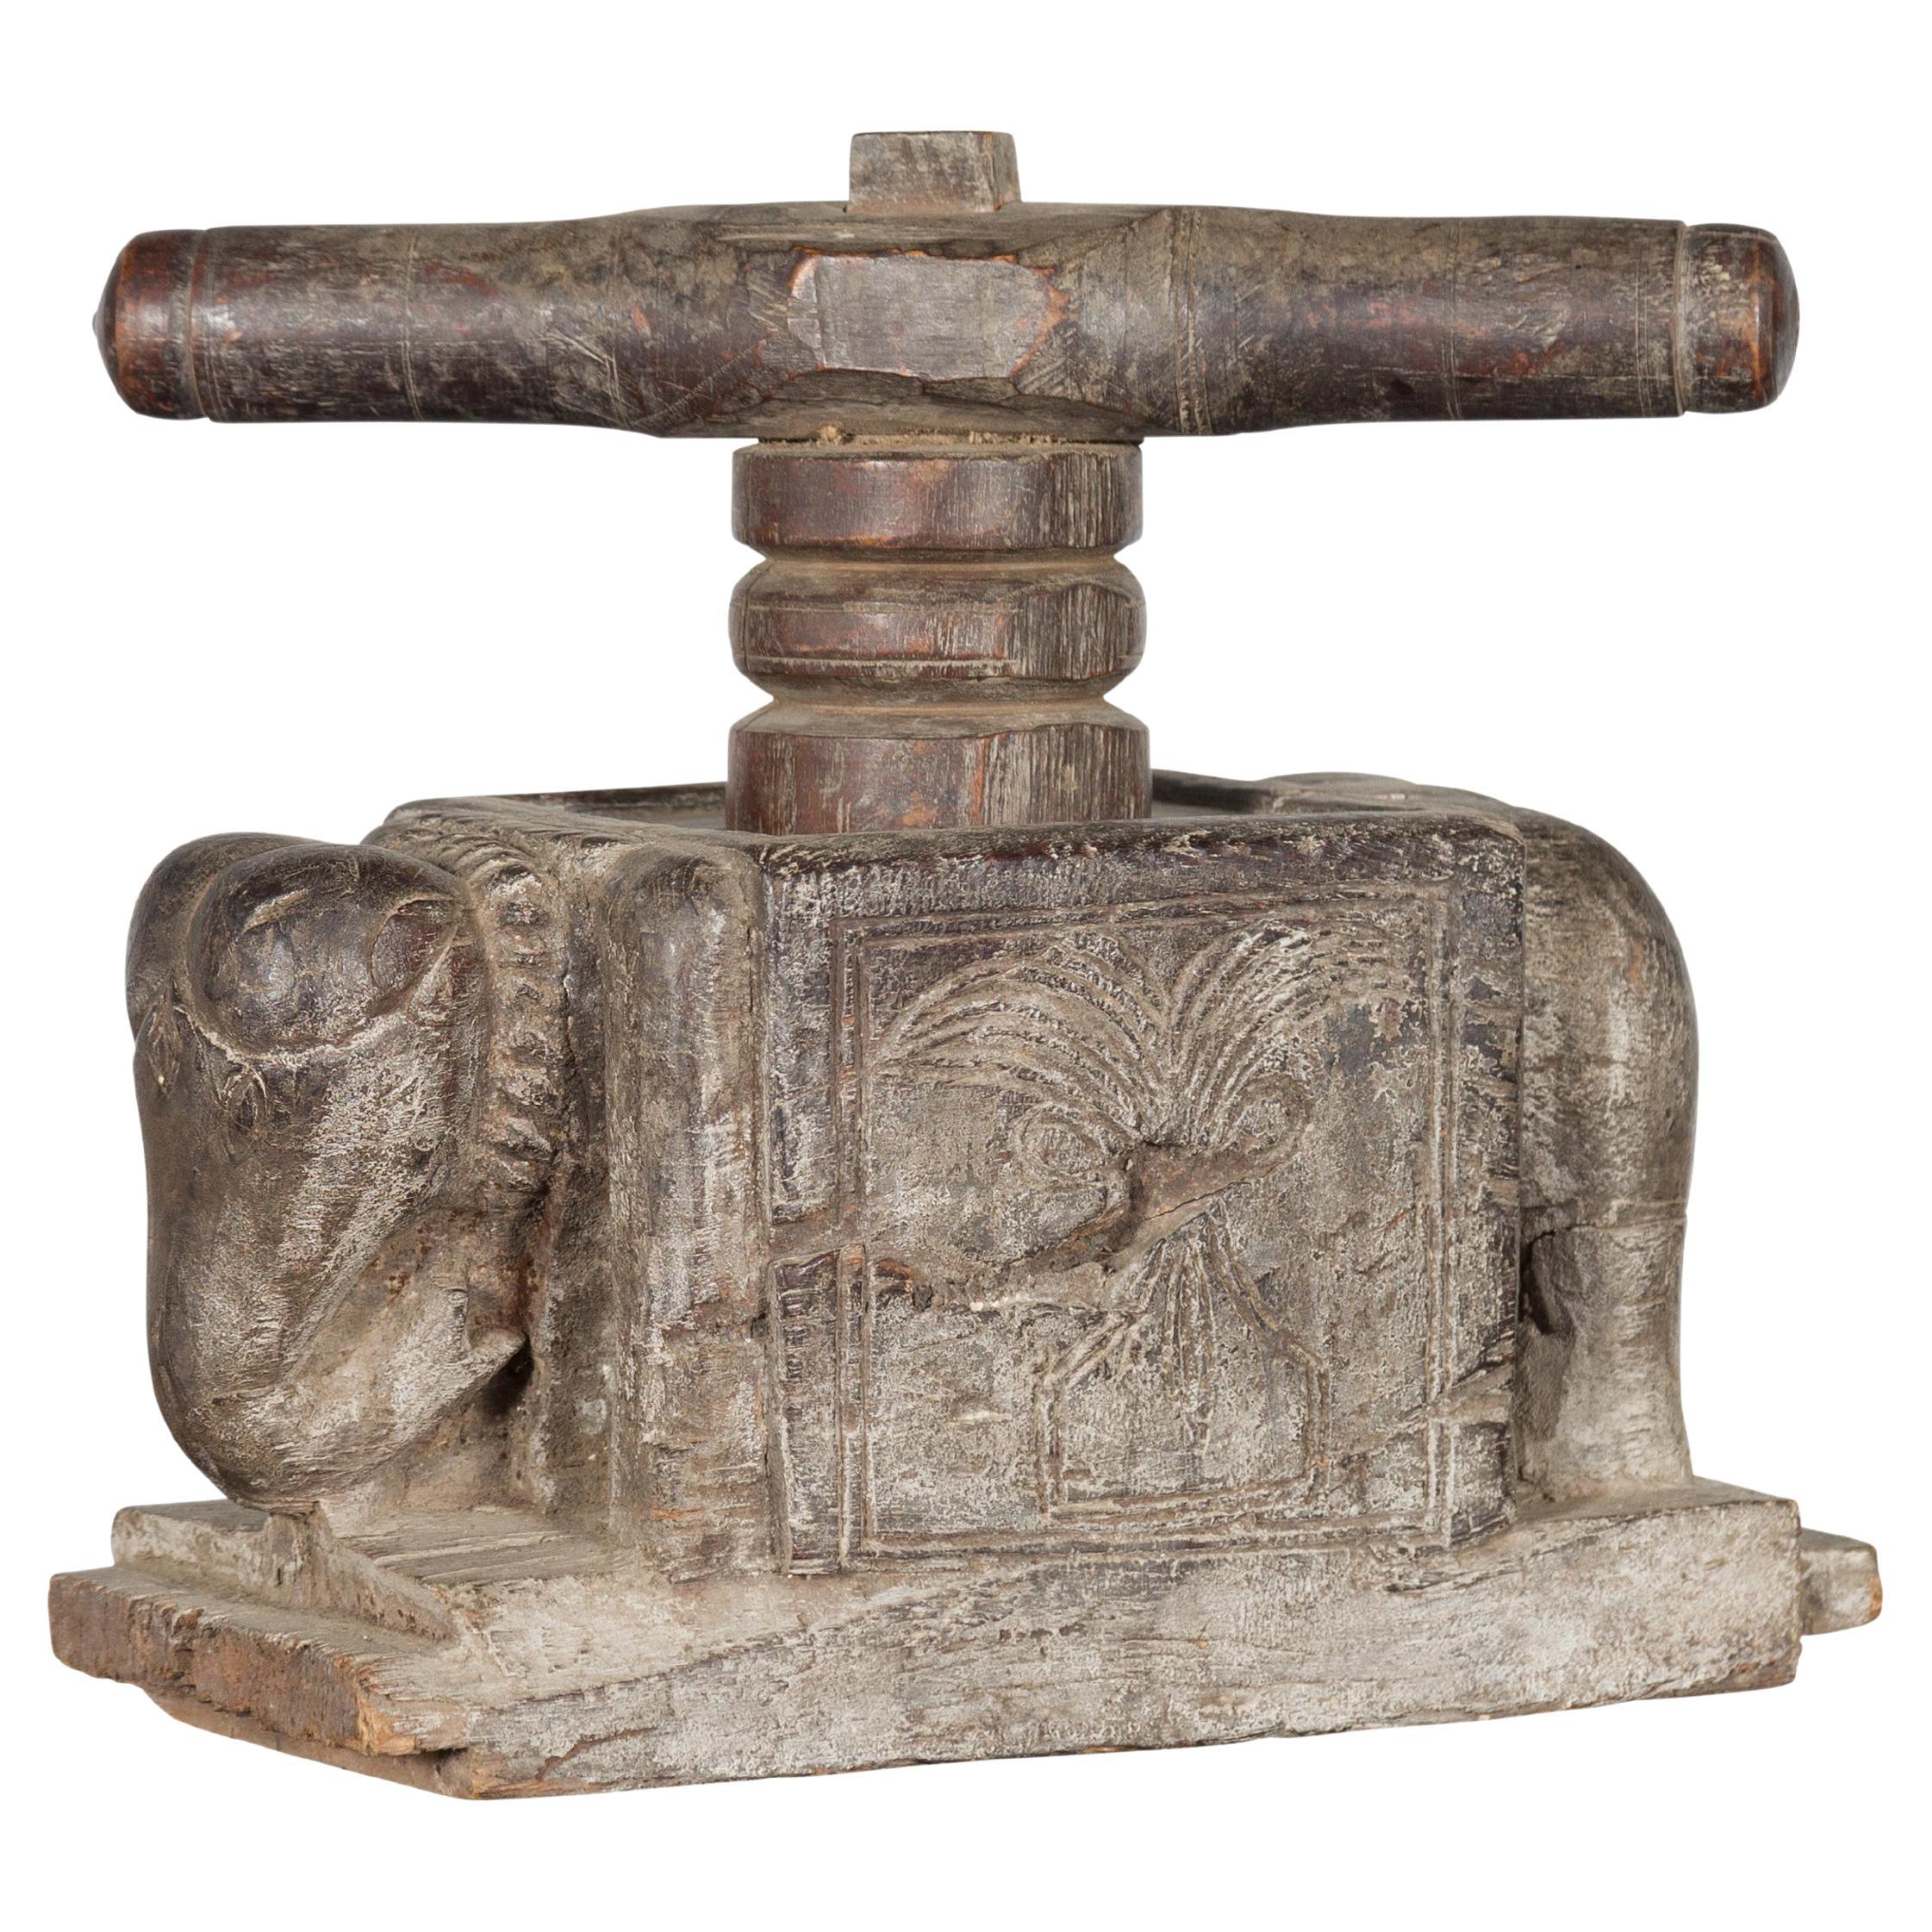 Indian Antique Wooden Hand Noodle Maker with Carved Elephant and Vice Press